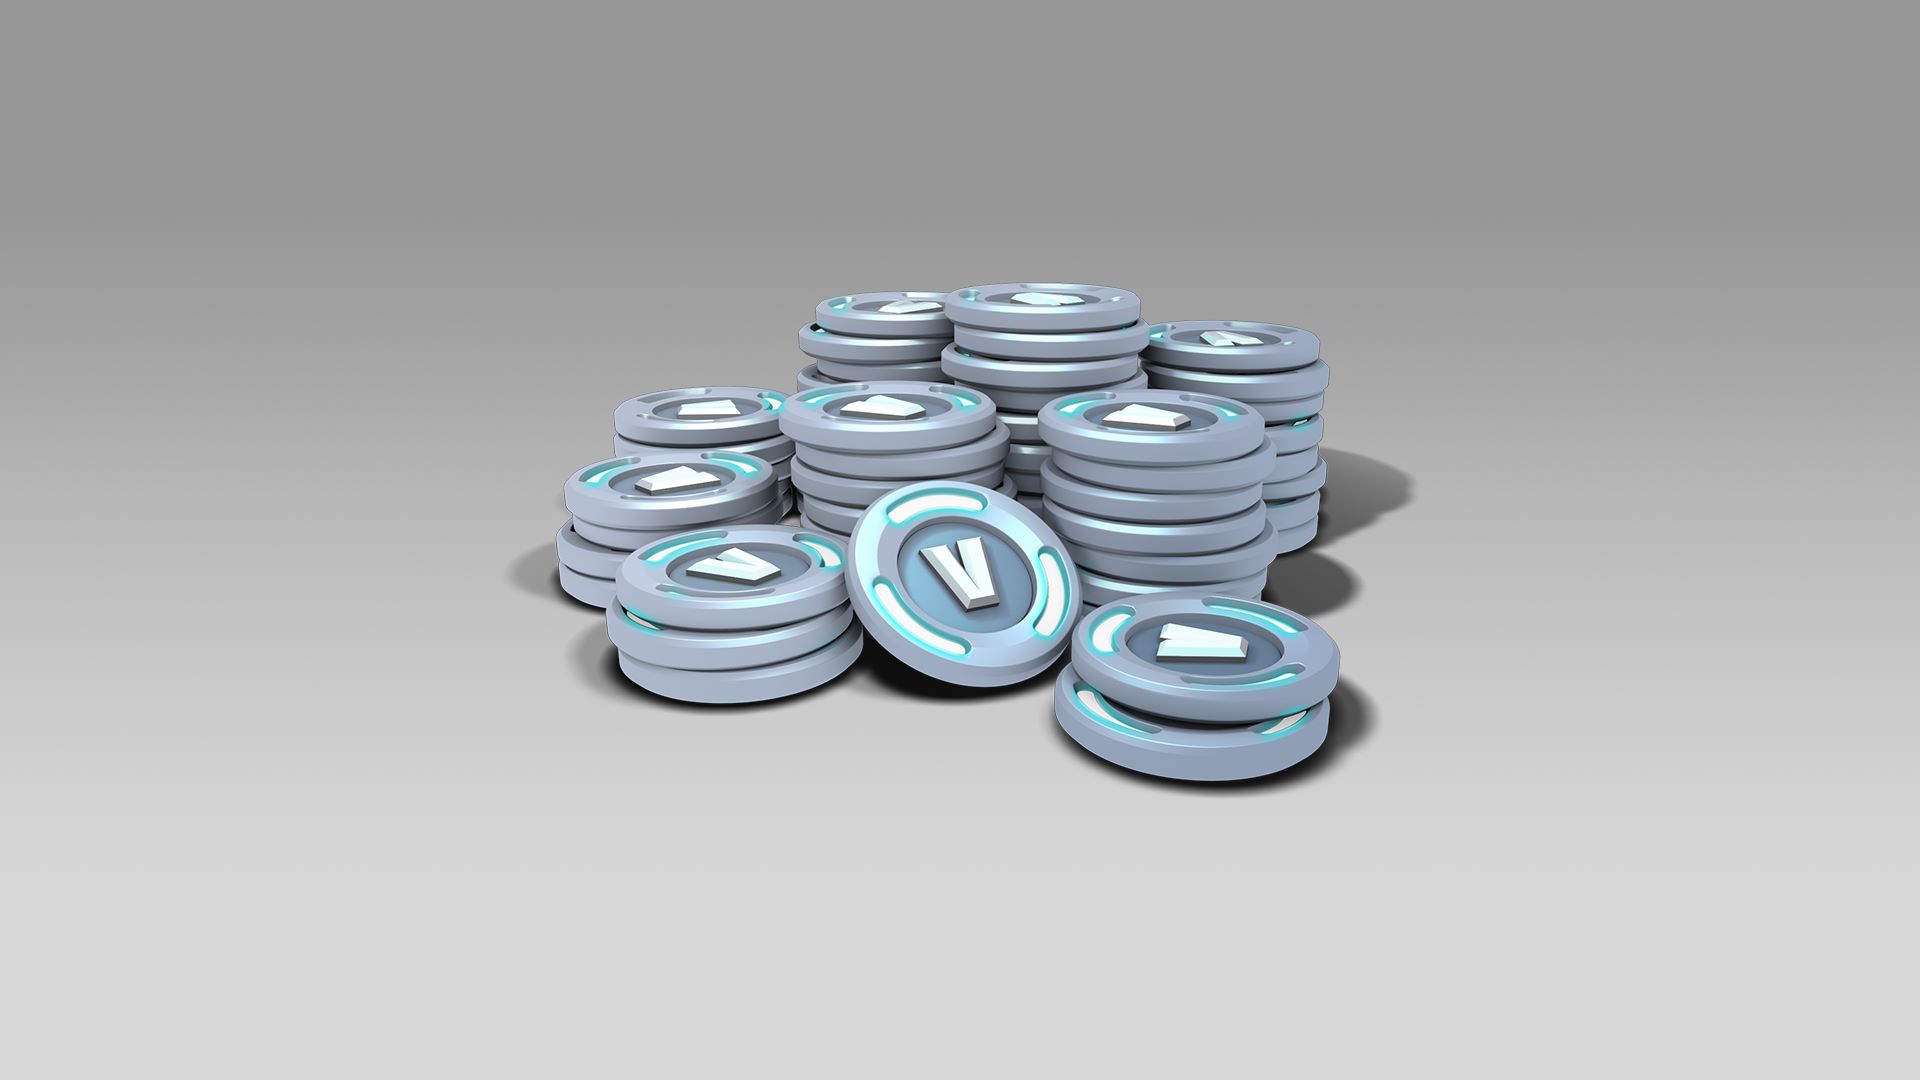 V-bucks compensation to banned players